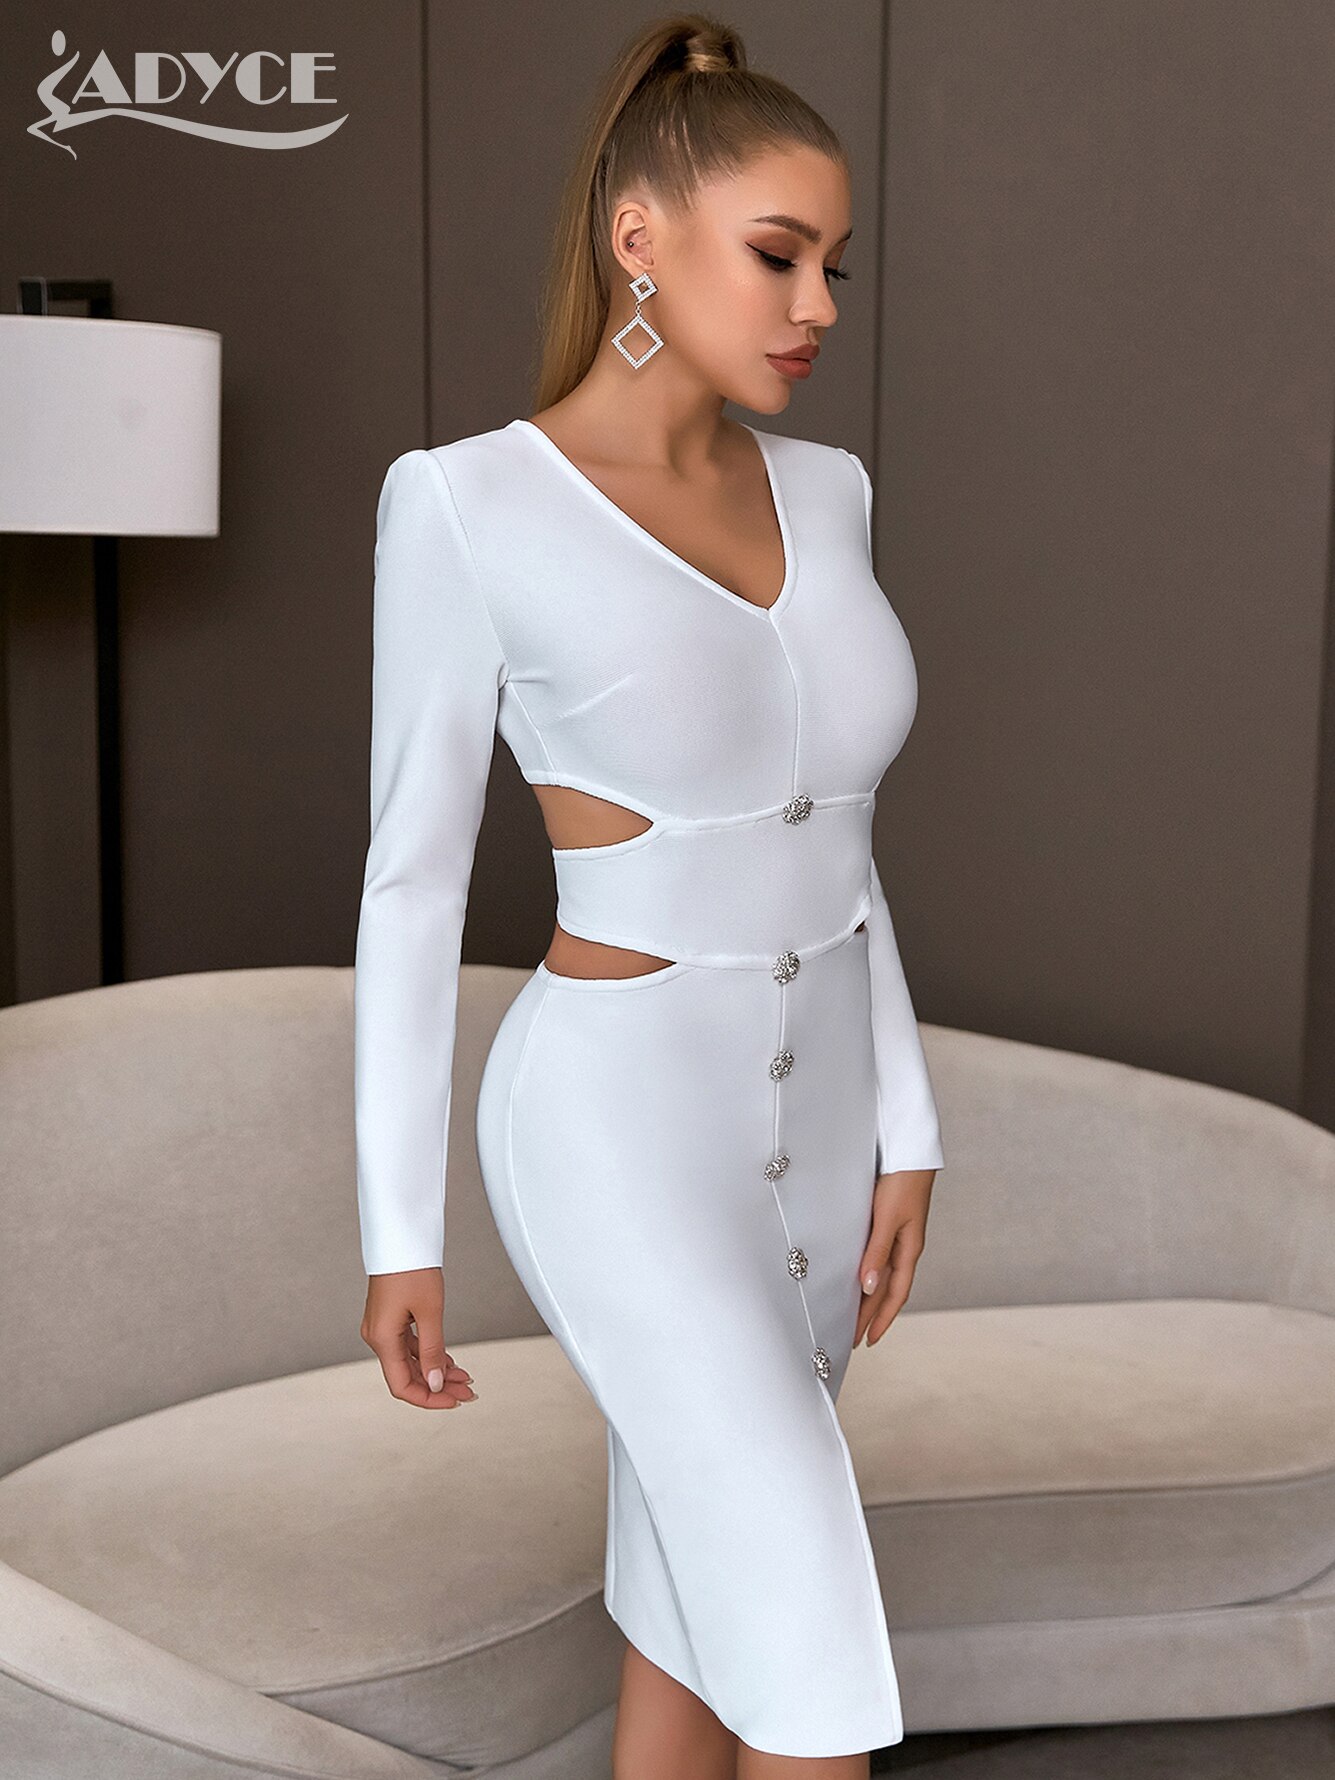 Adyce-2022-Winter-Long-Sleeve-Maxi-Bandage-Dress-For-Women-Sexy-Hollow-Out-Backless-V-Neck-1